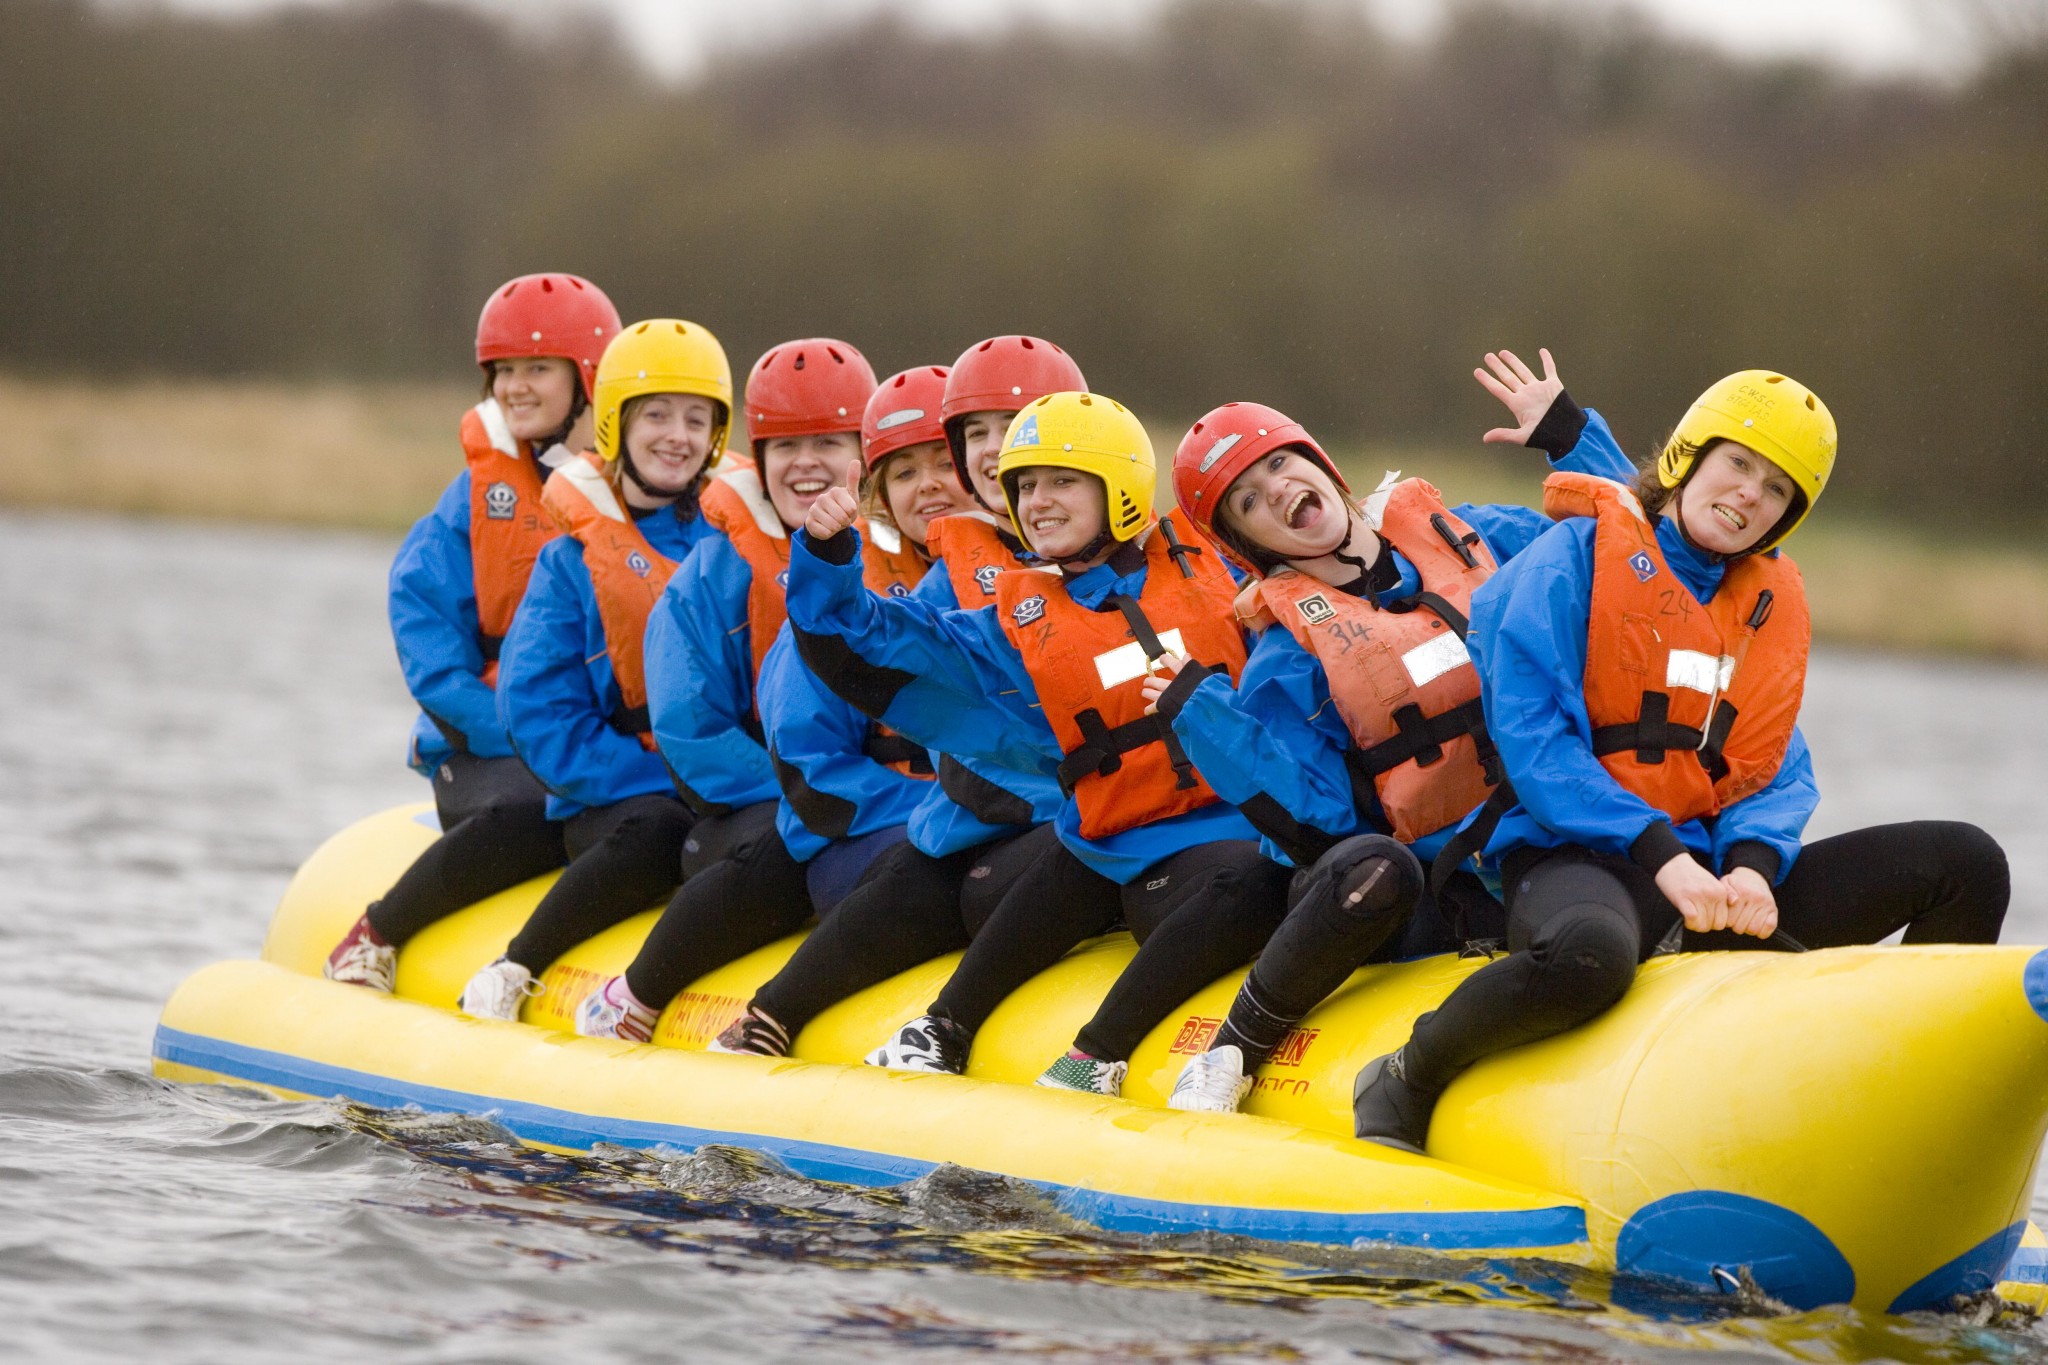 July Watersports Activity Days